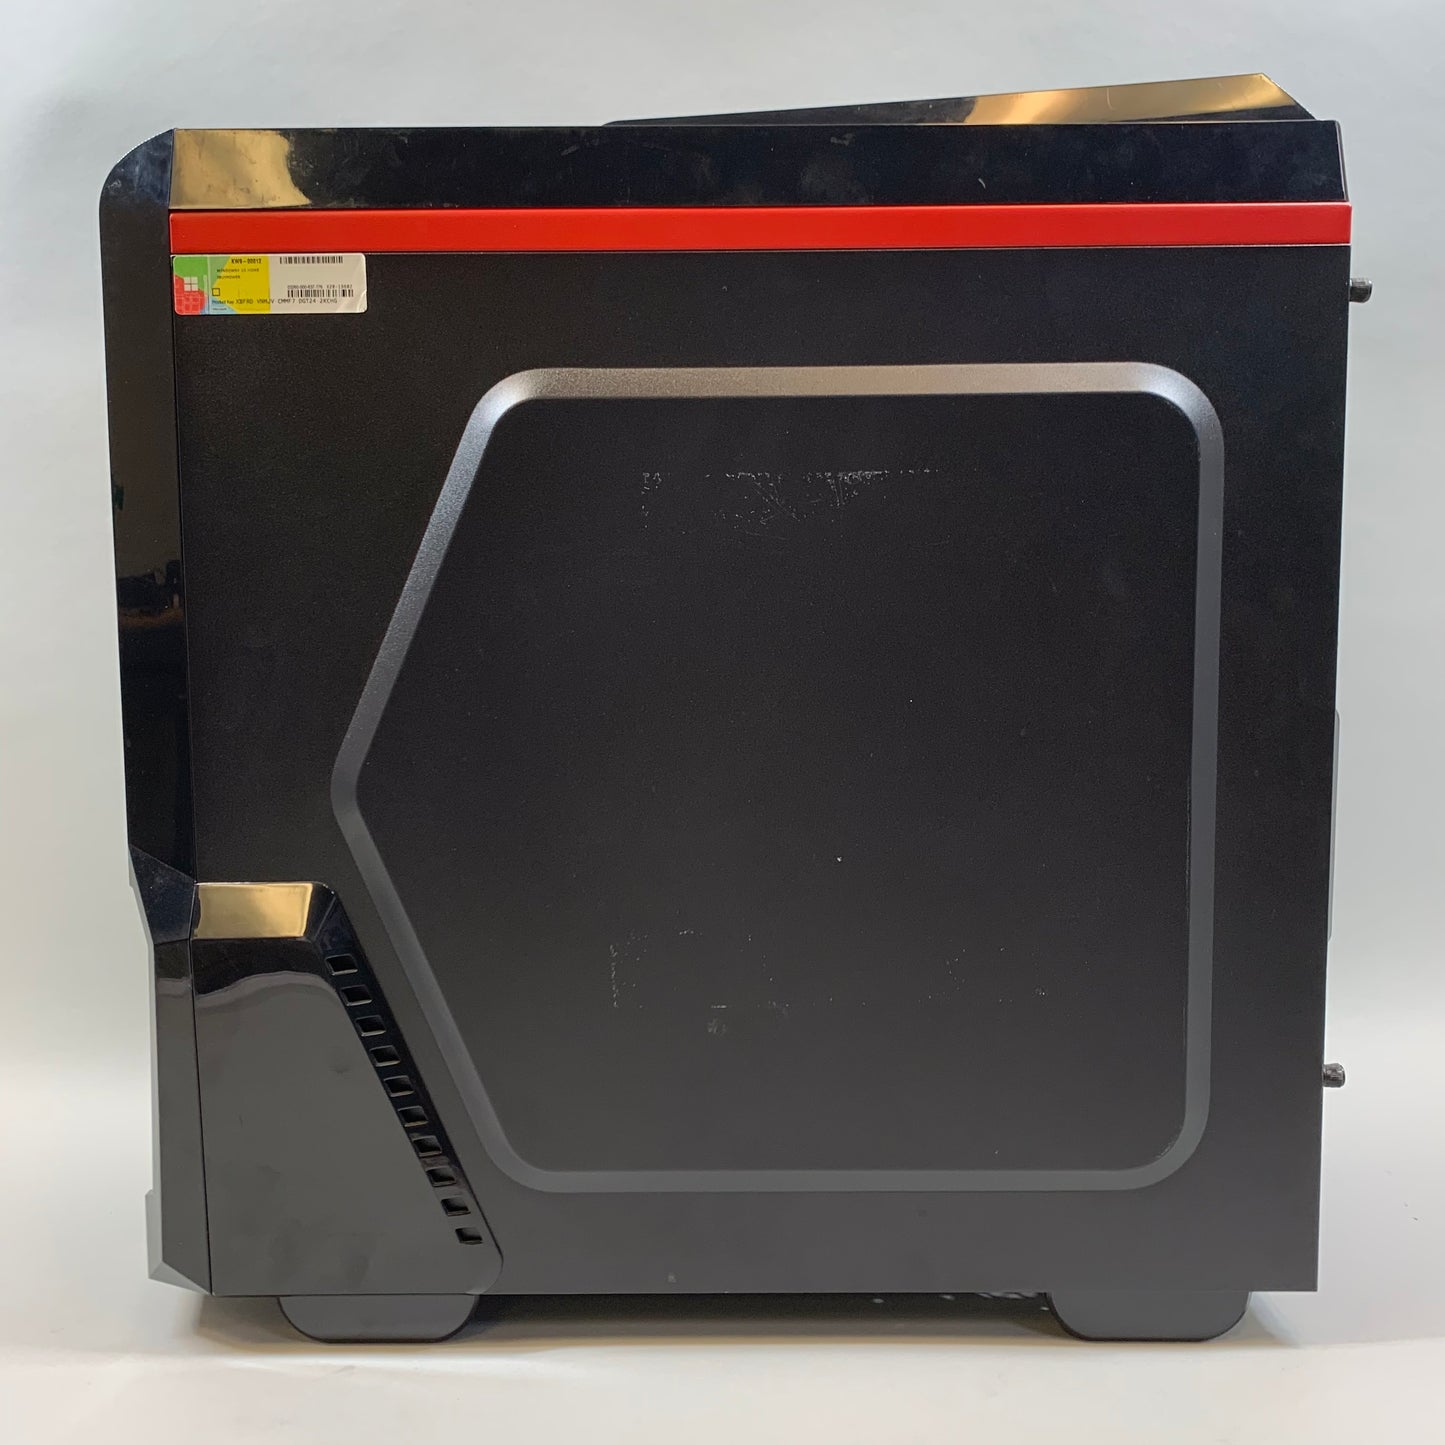 IBuyPower Red and Black Gaming Computer Case Chassis - Used